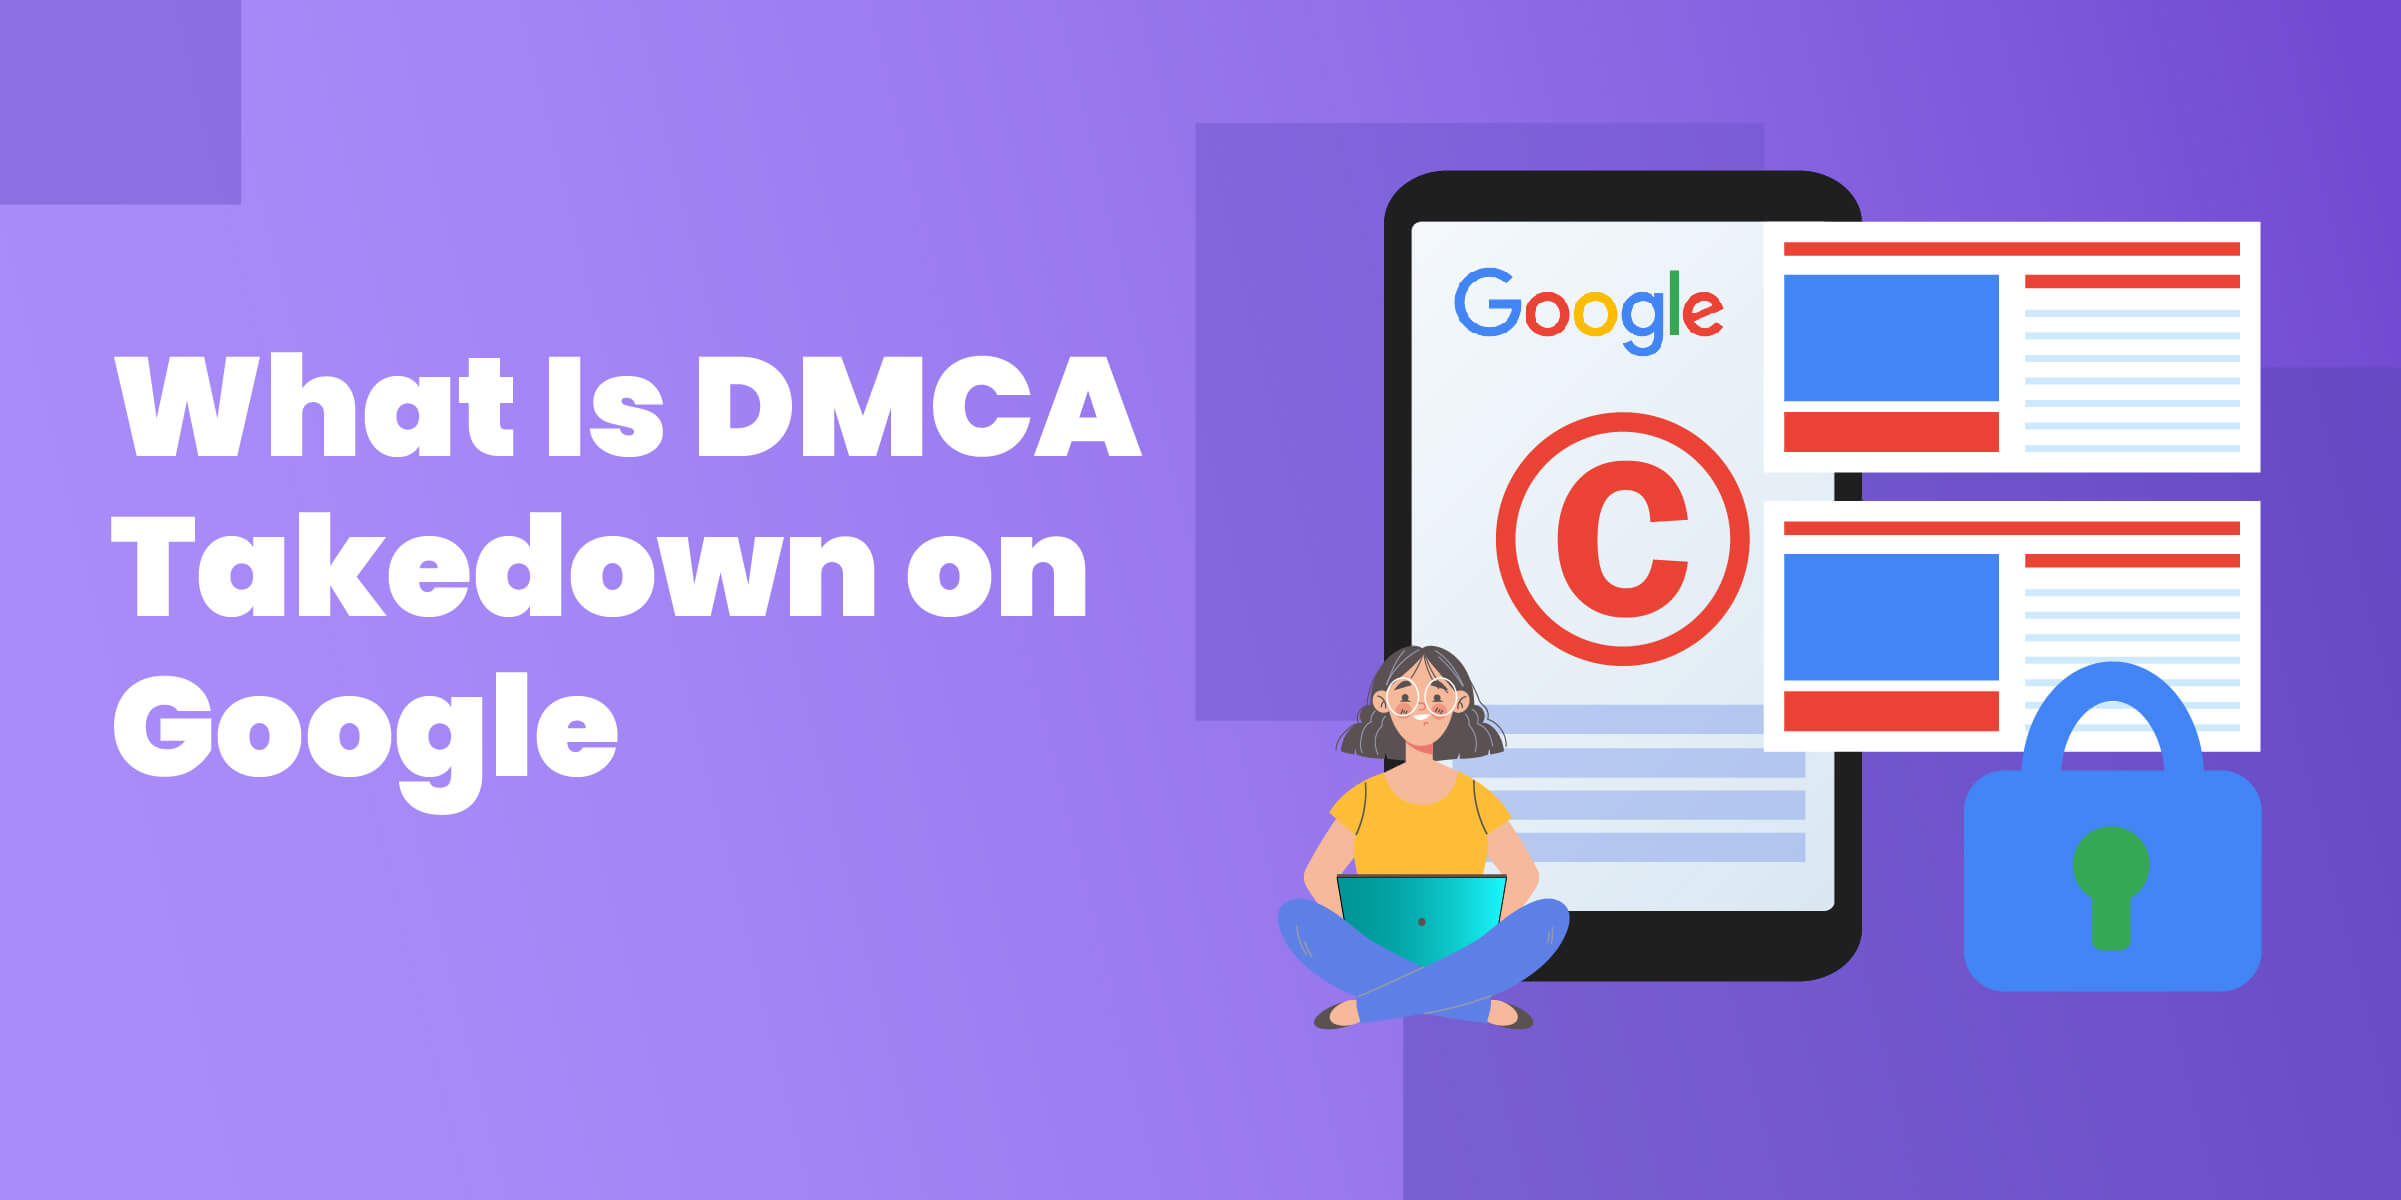 What Is DMCA Takedown on Google